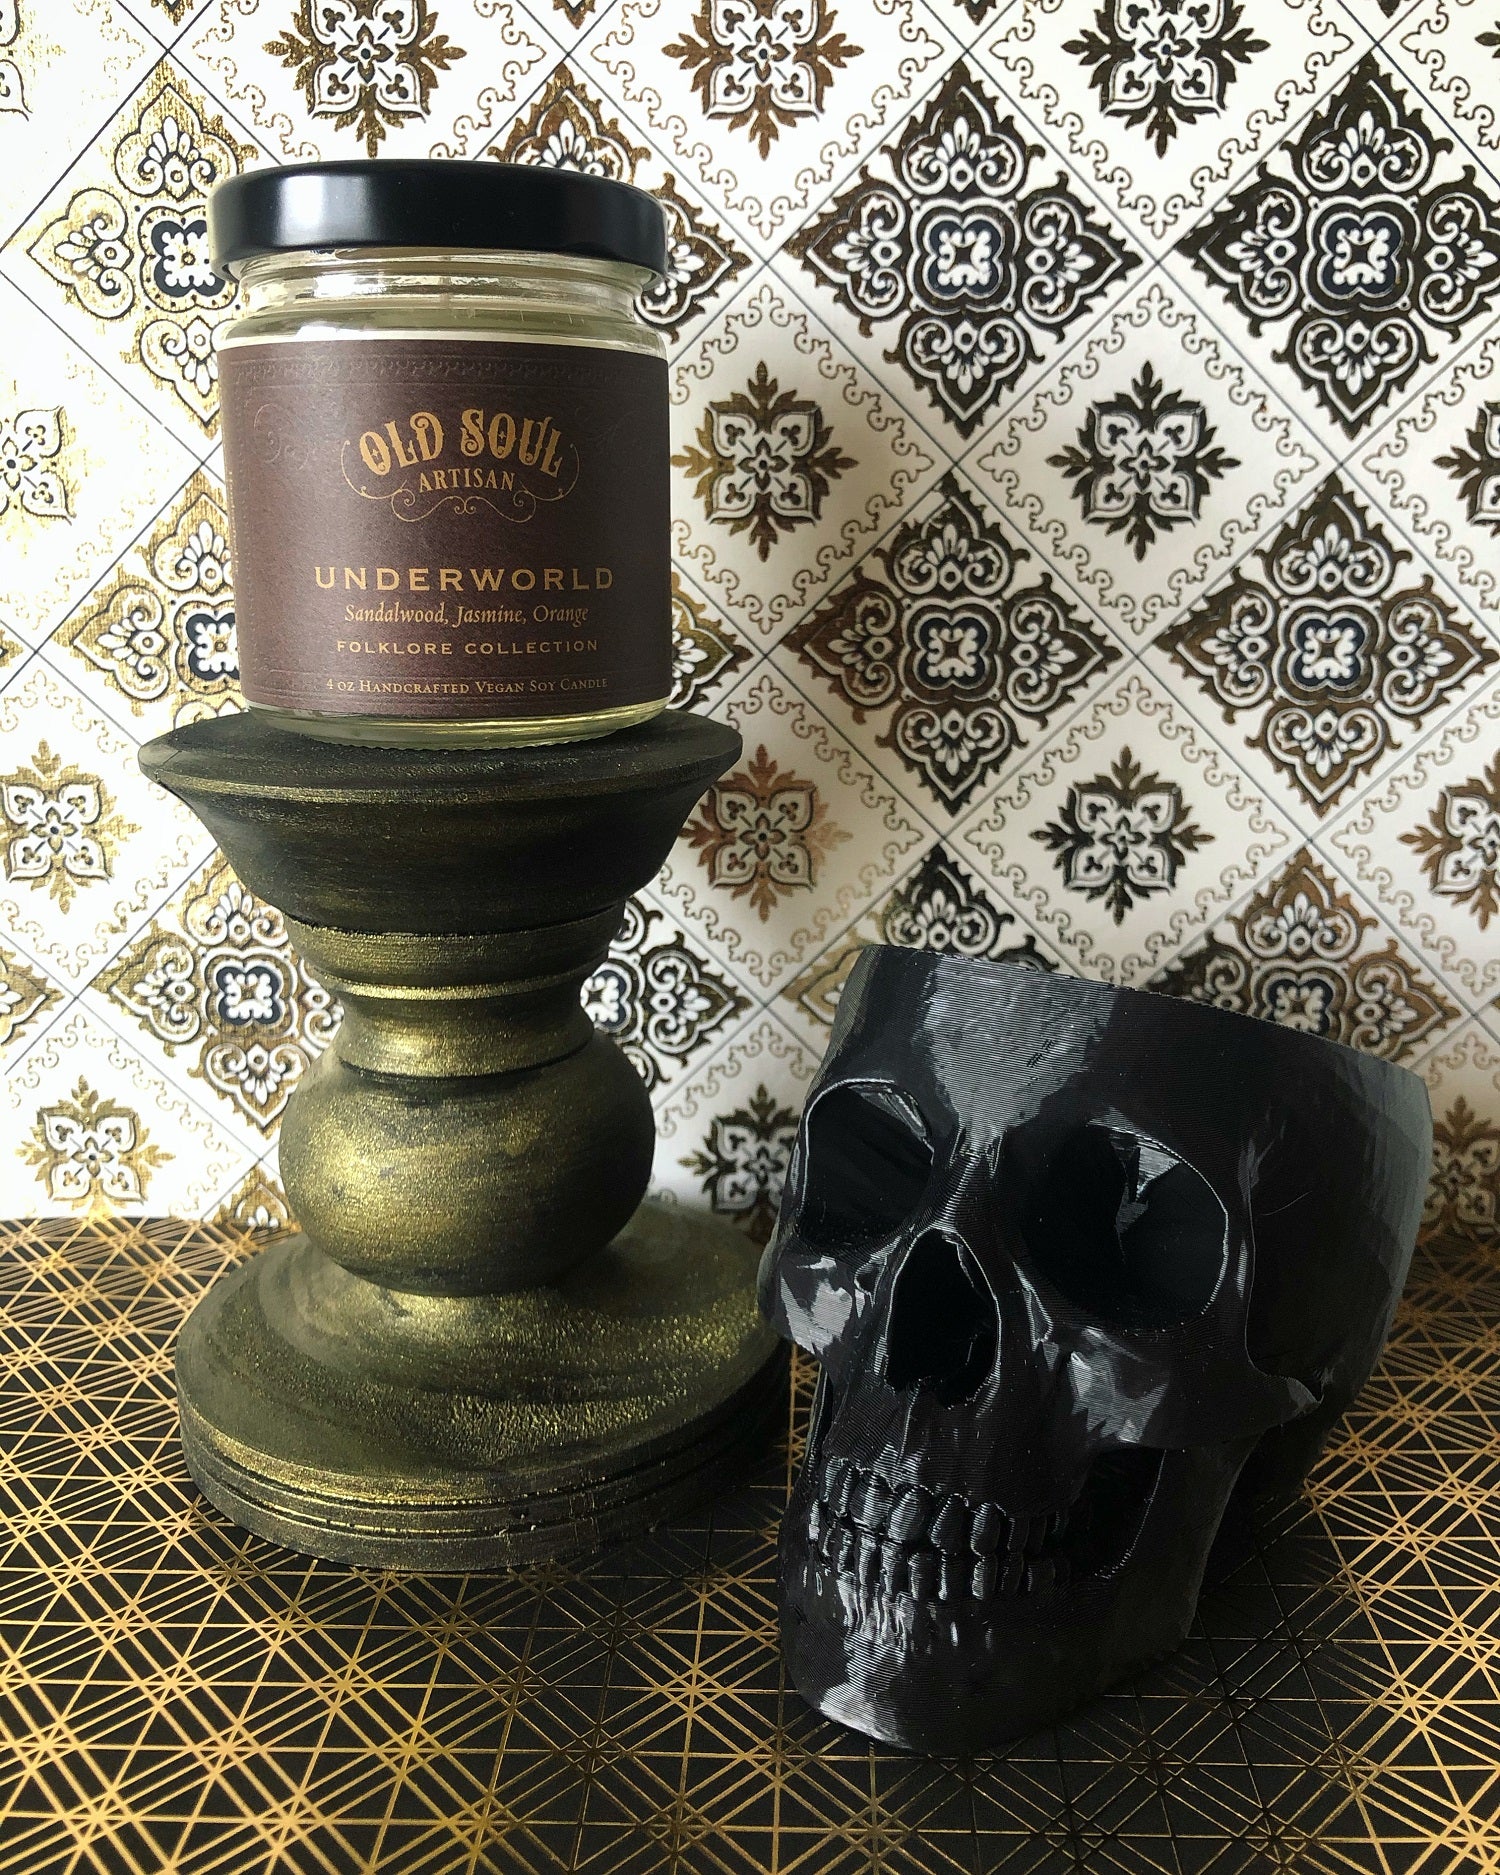 Underworld Soy Candle - Old Soul Artisan